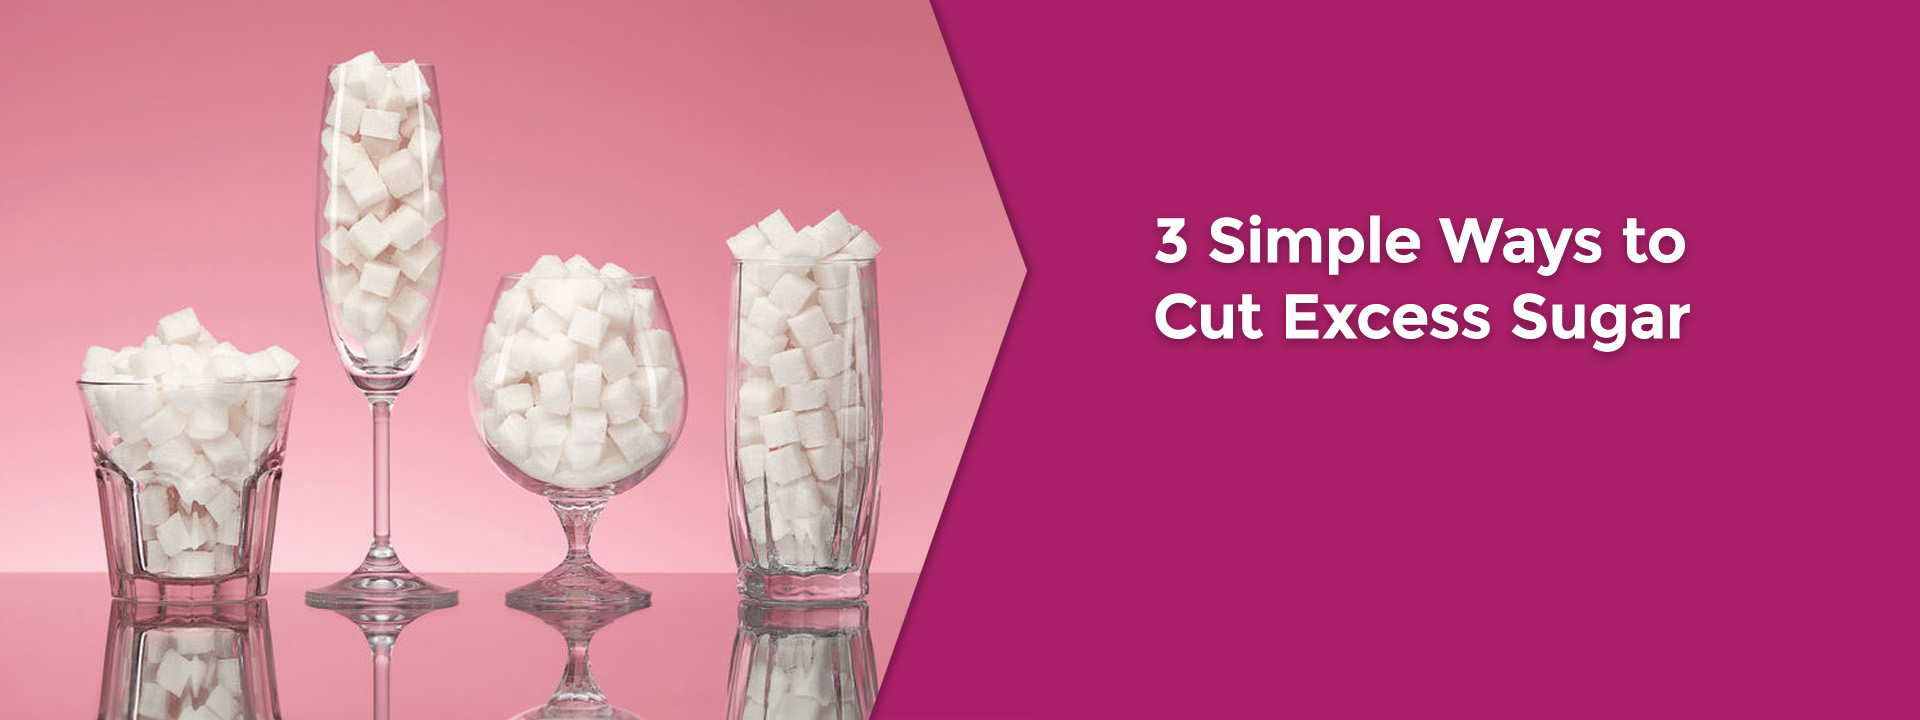 3 Simple Ways to Cut Sugar & Empty Calories from Your Diet